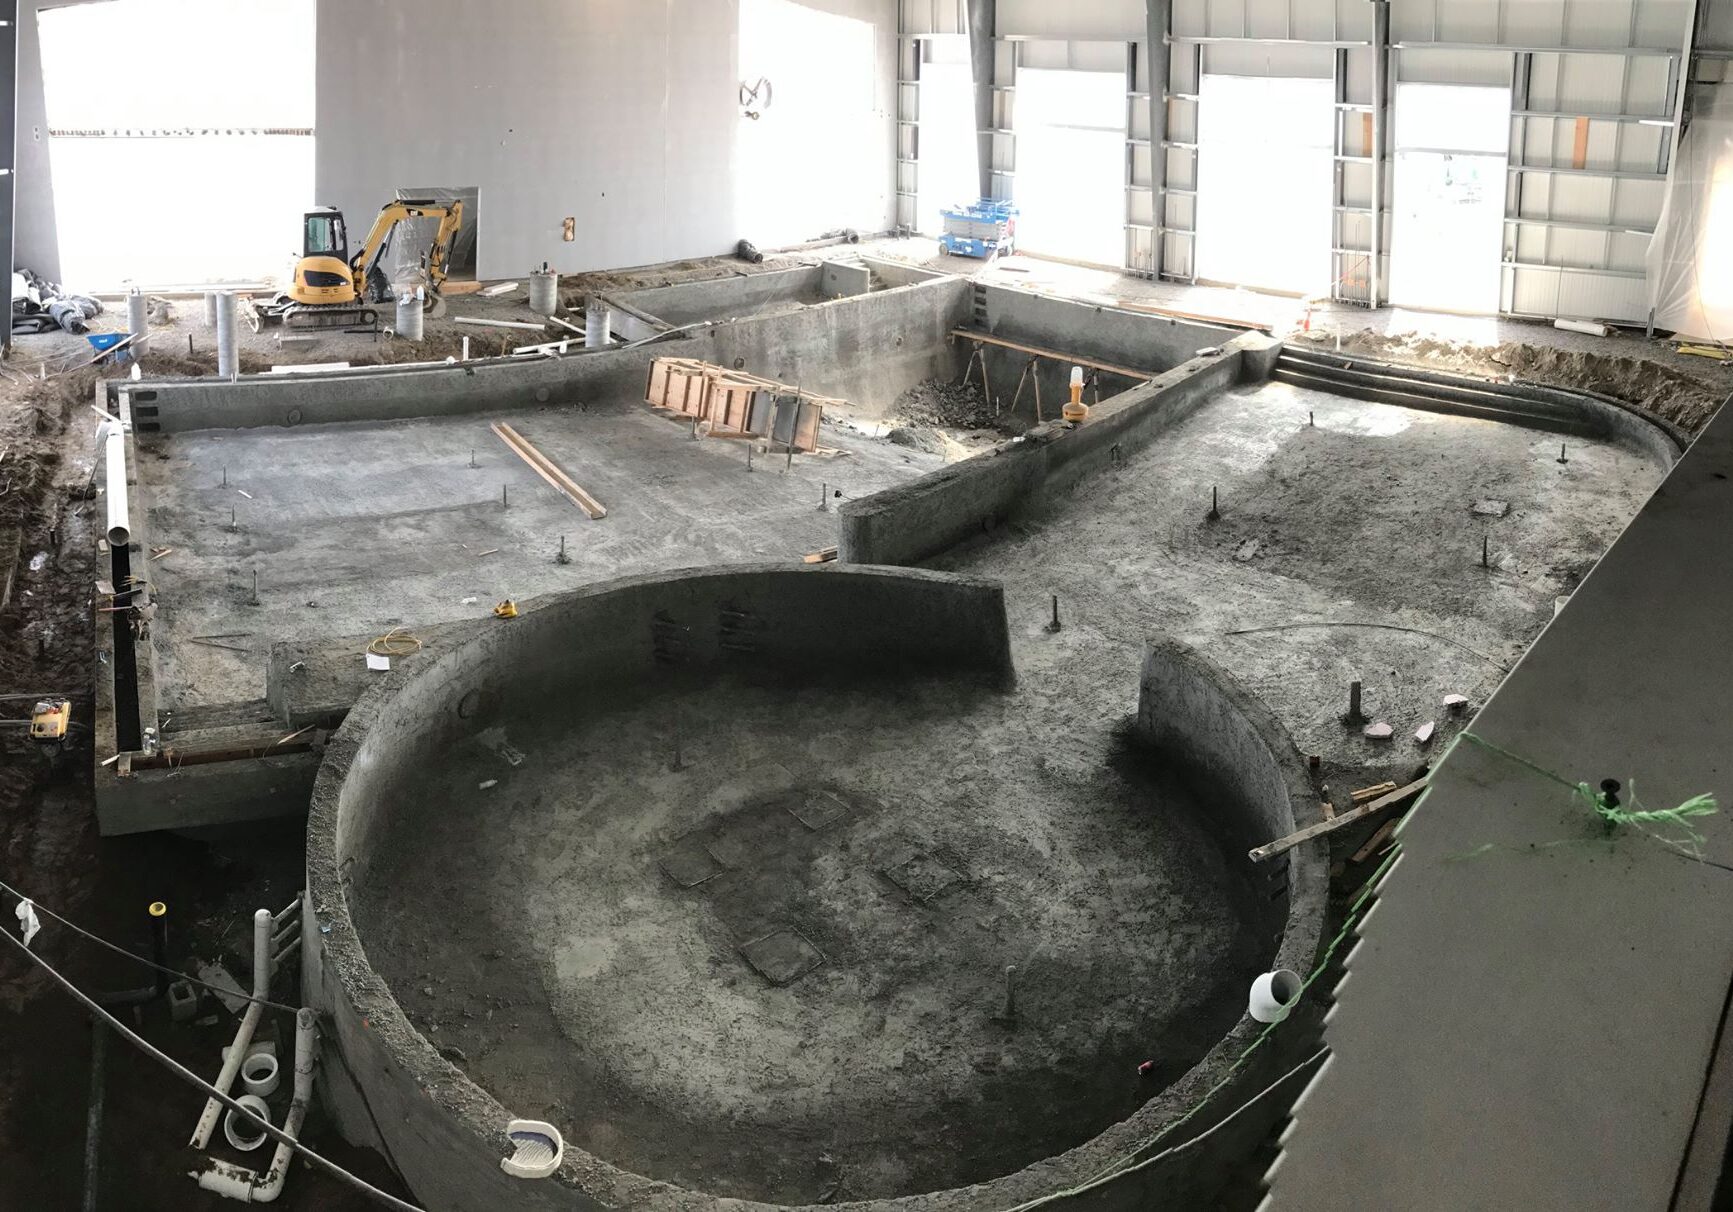 Pool Construction, pouring concrete to form the vortex and other pools.